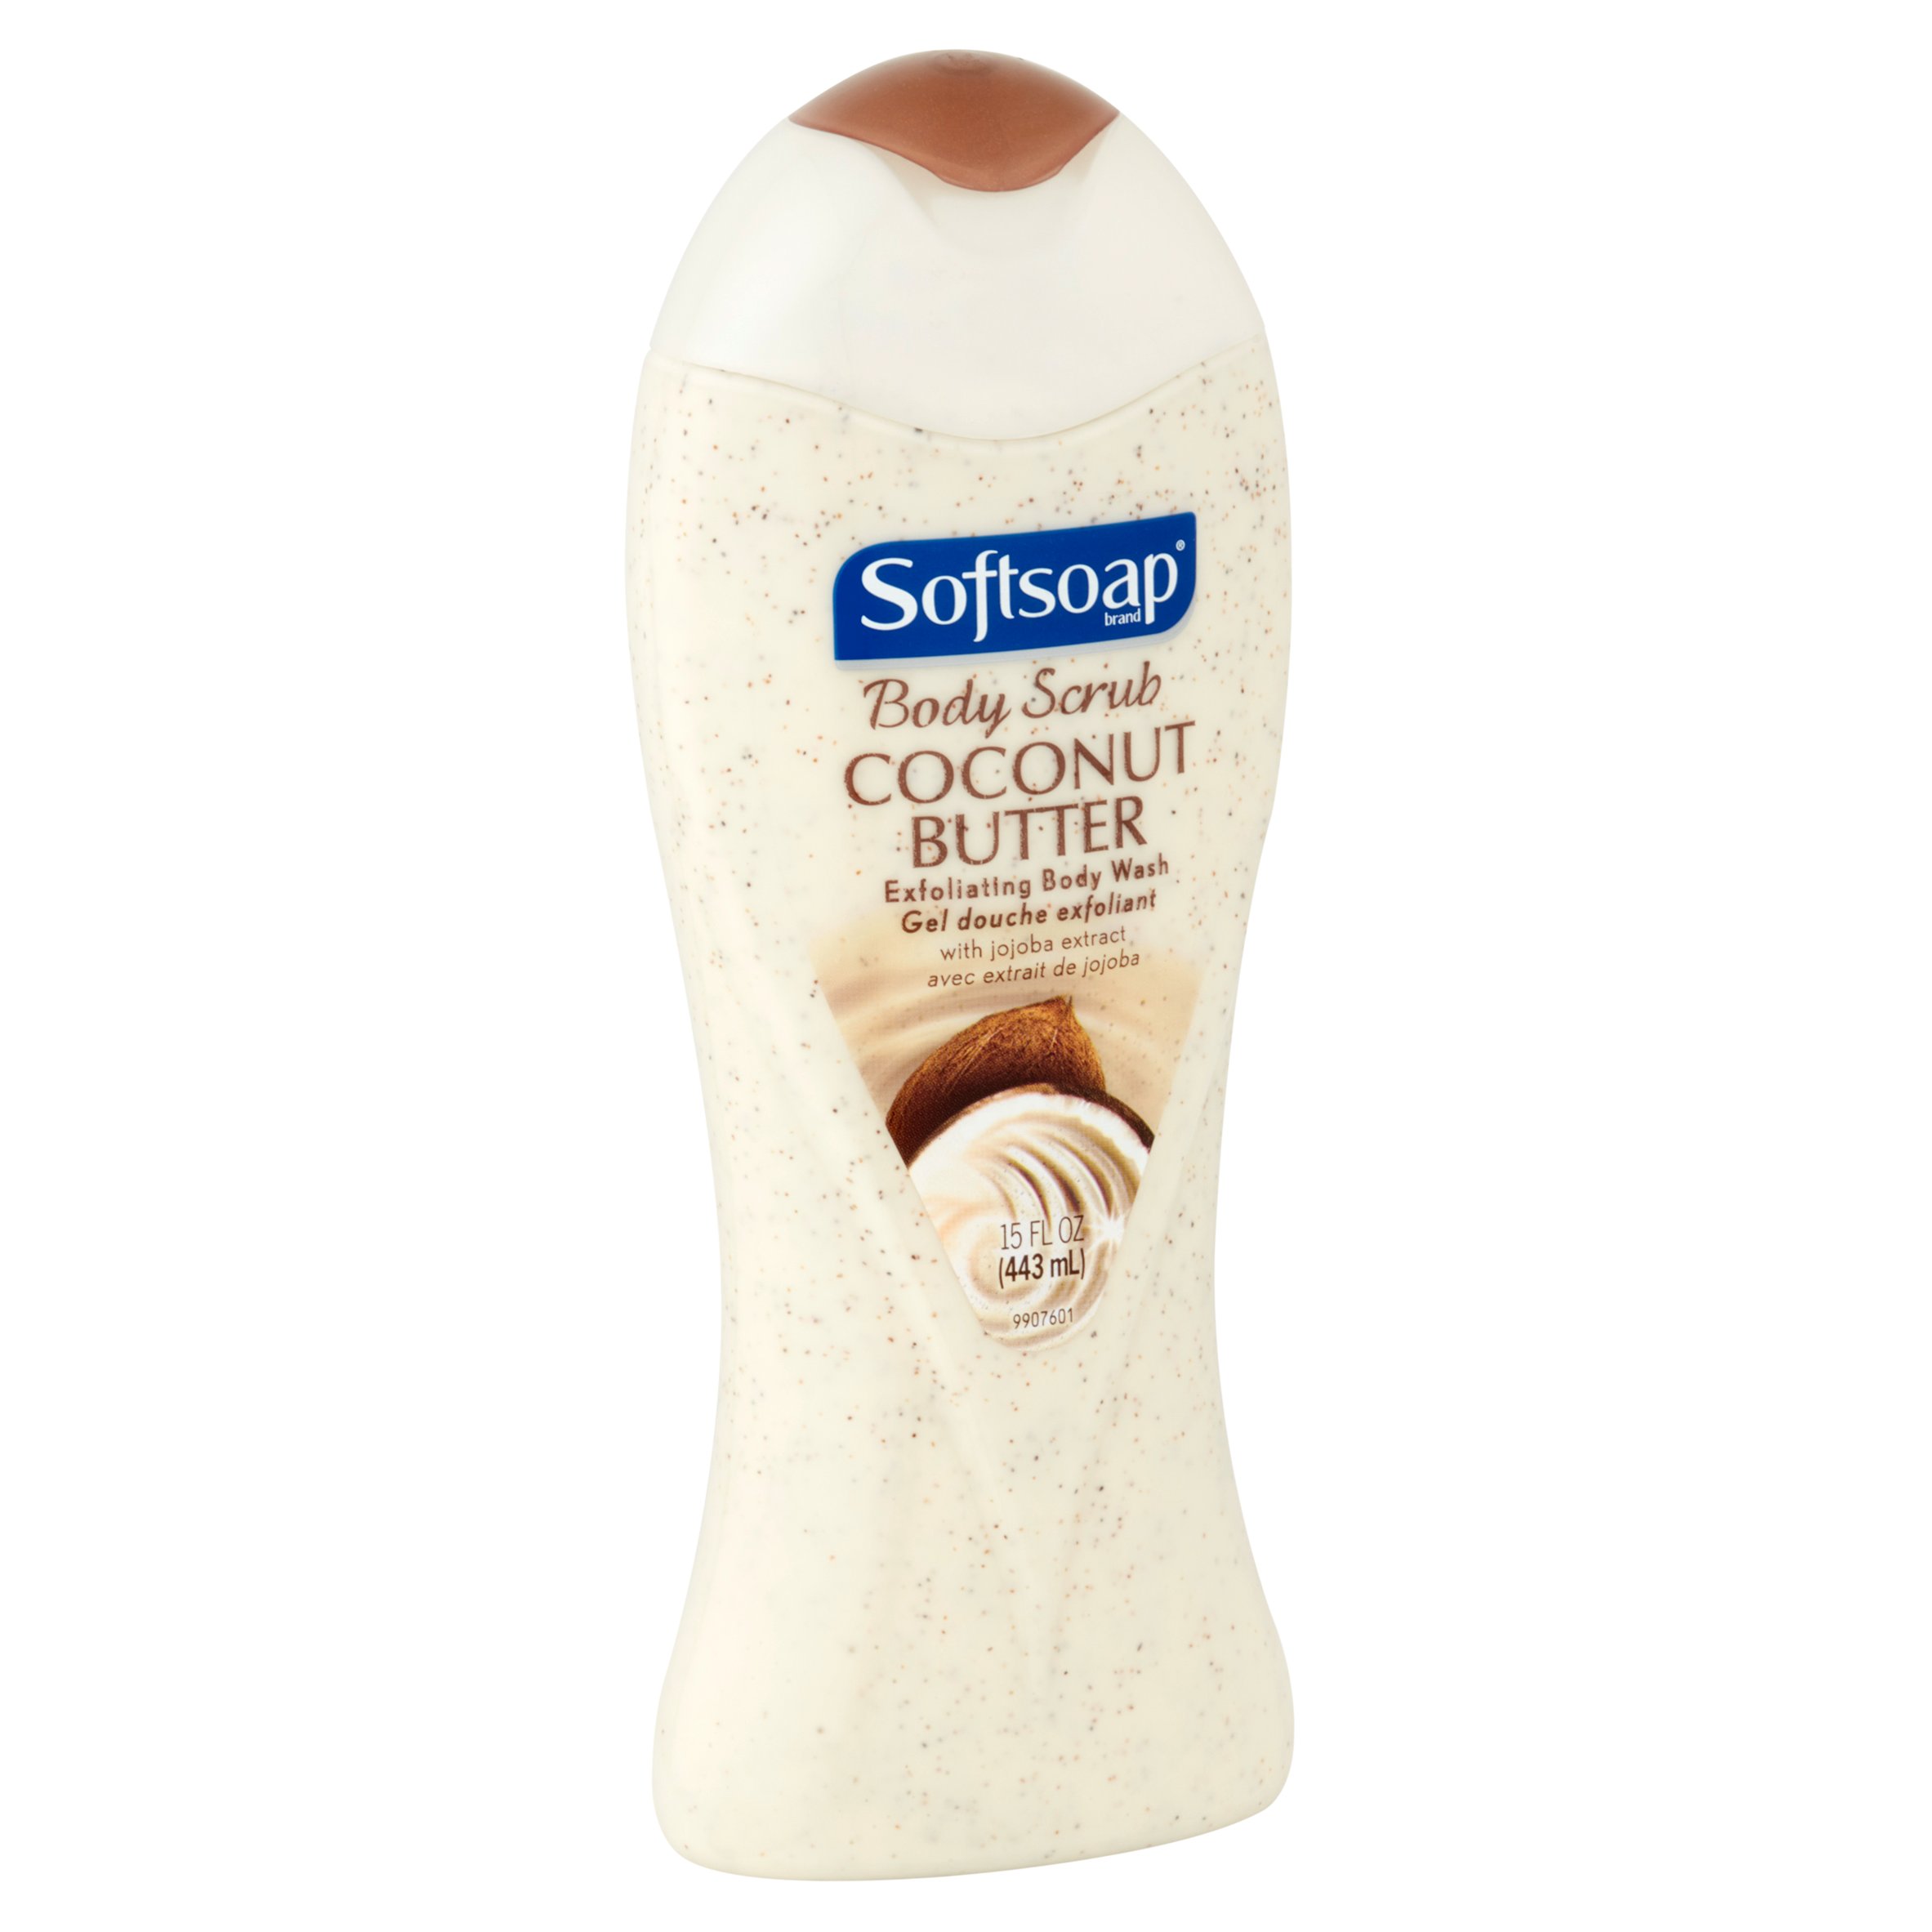 Softsoap, Coconut Butter, Exfoliating Body Wash, 15 Ounce - image 2 of 4